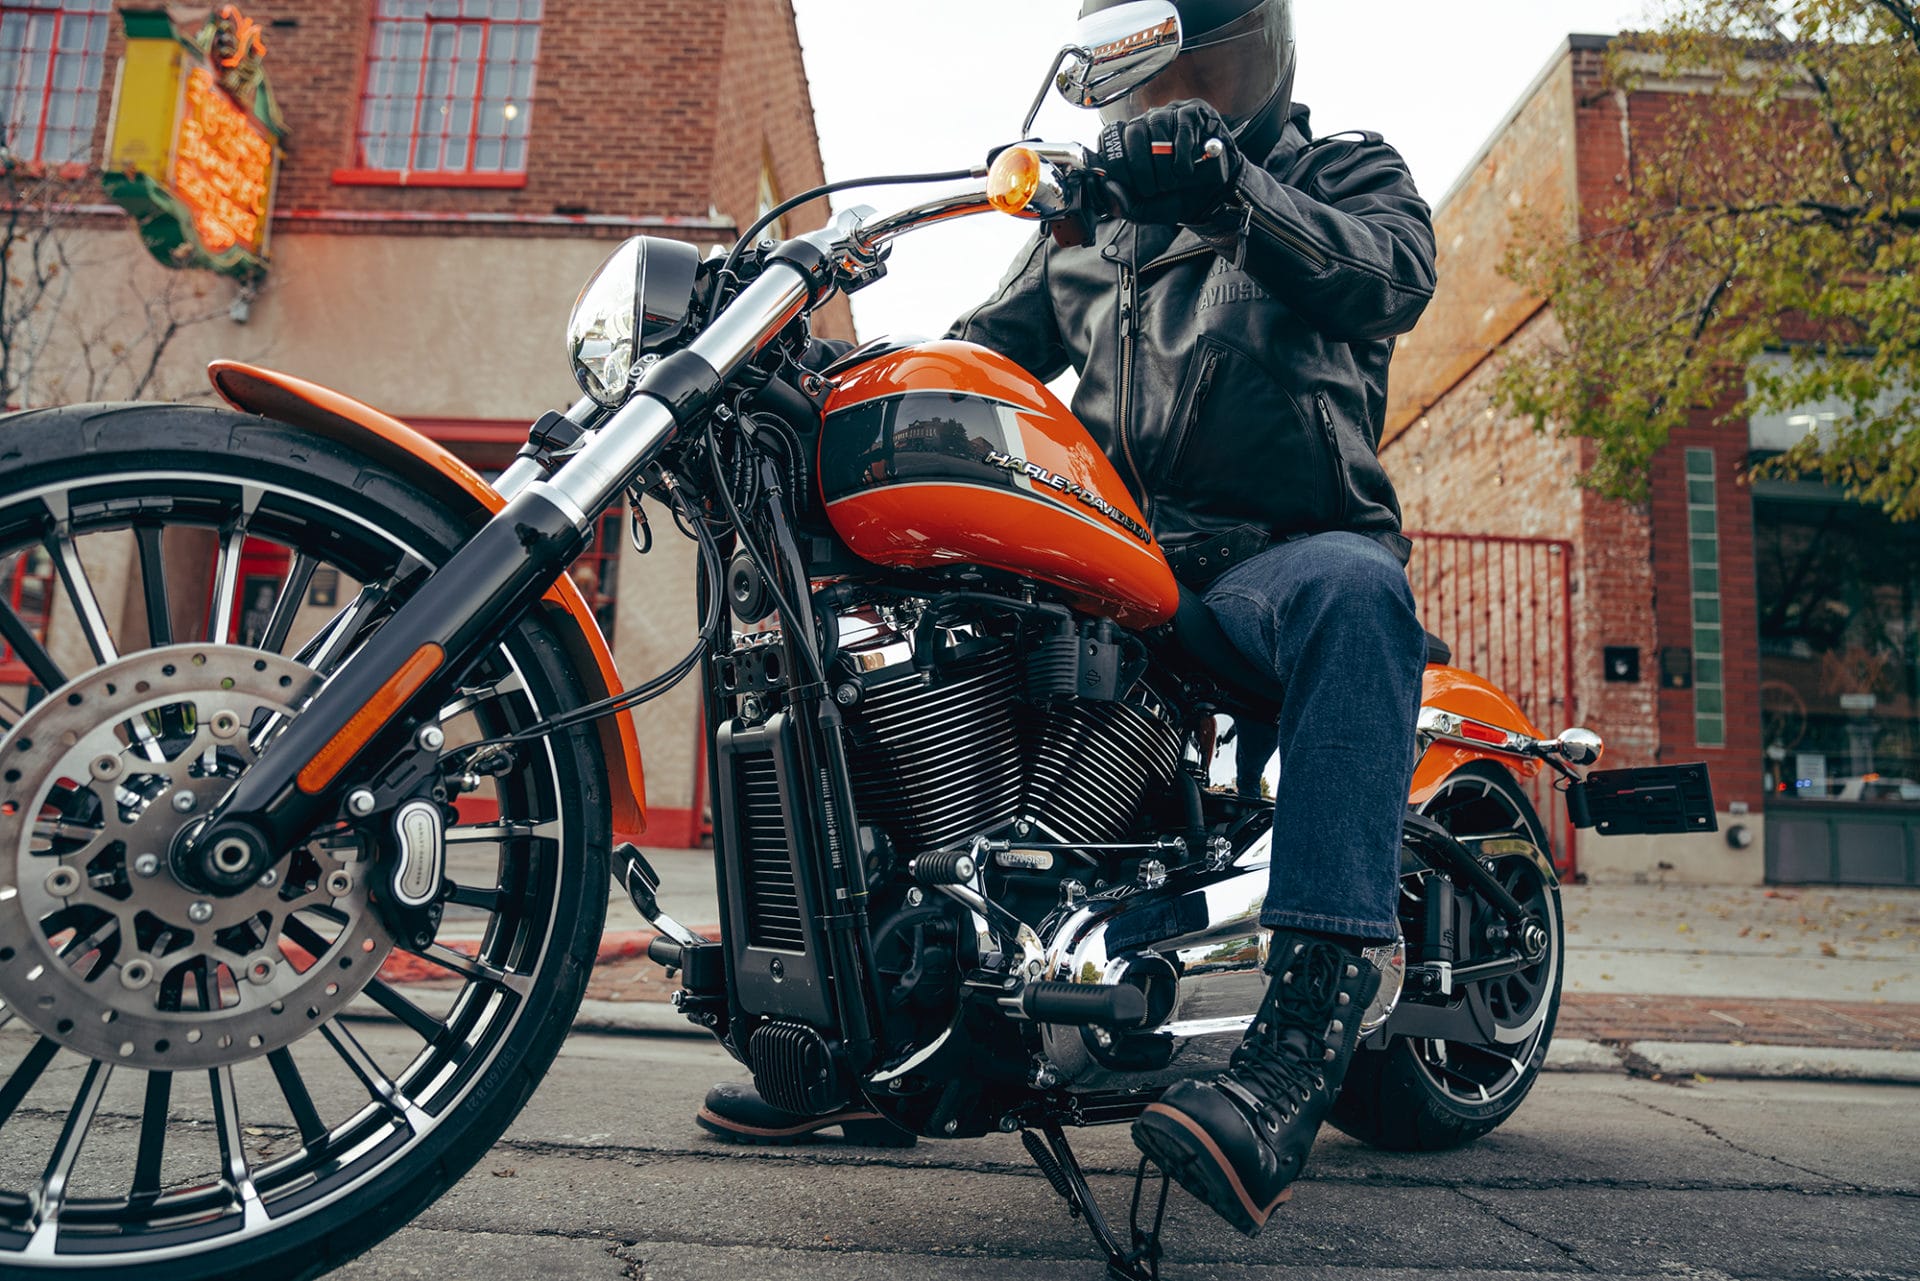 The new Harley-Davidson Breakout for 2023